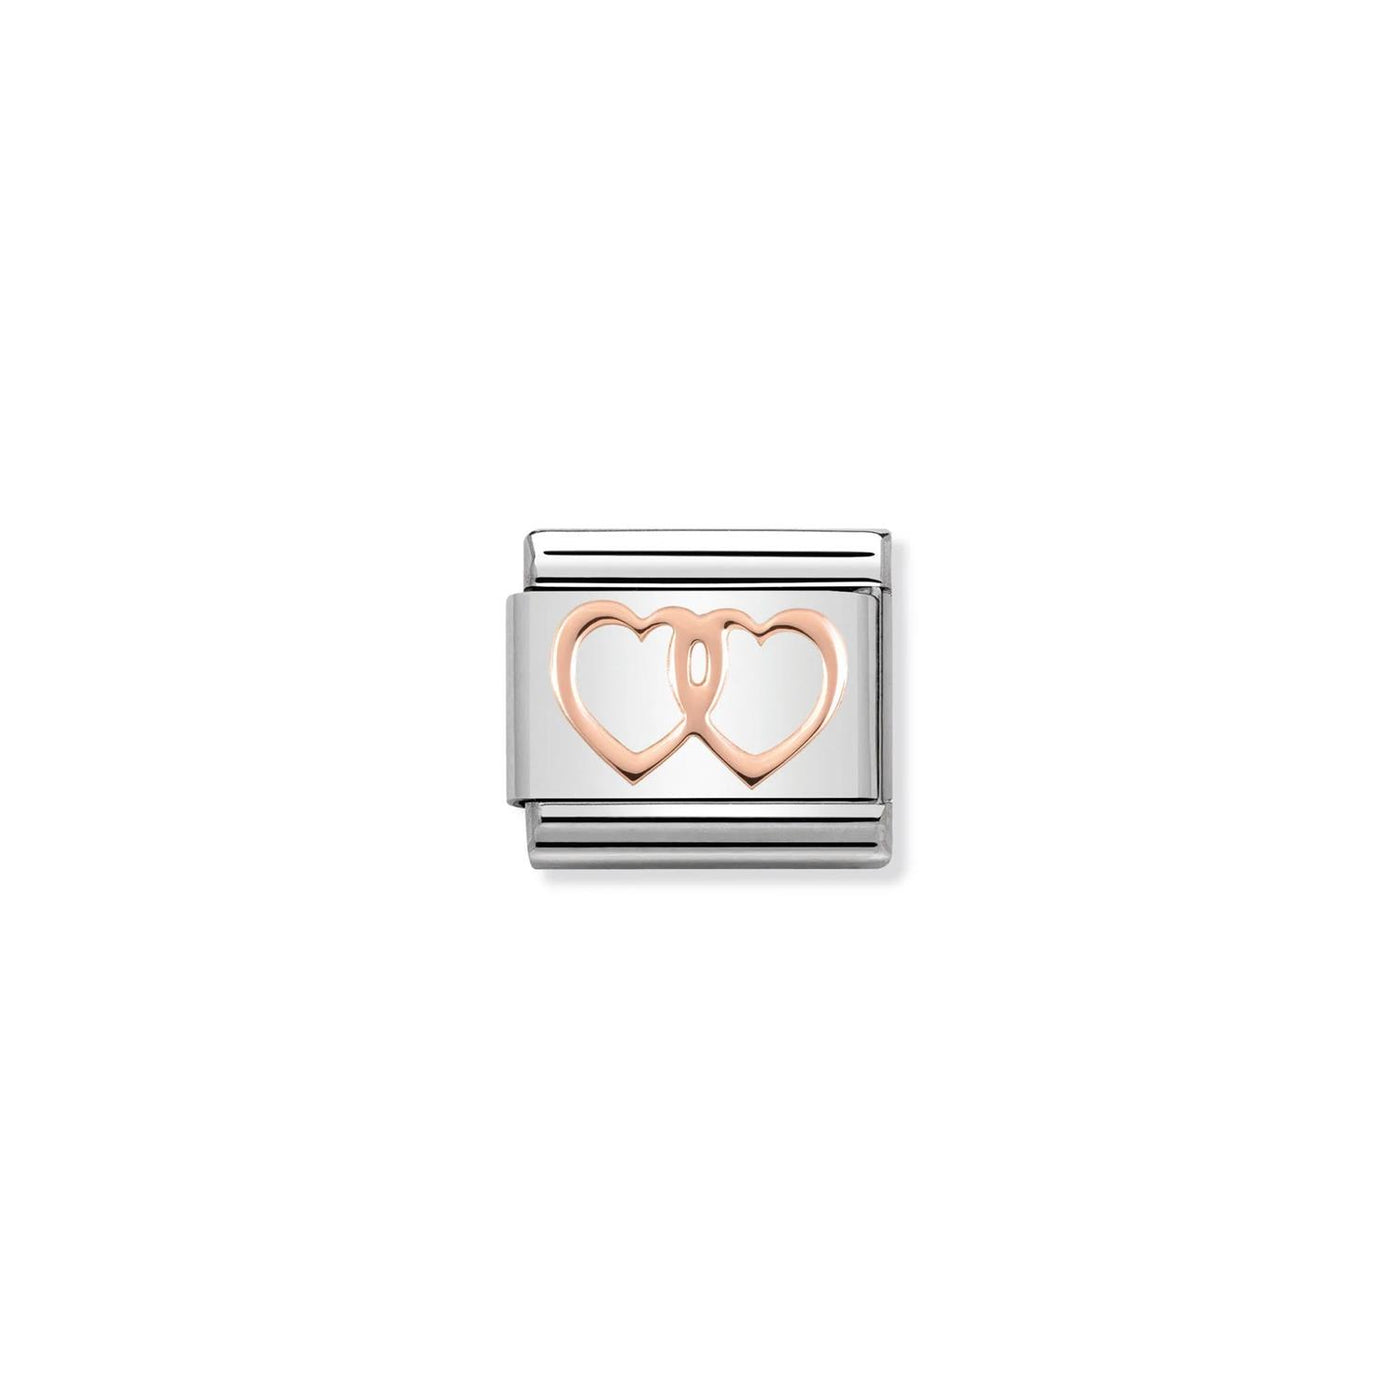 Double Hearts rose gold